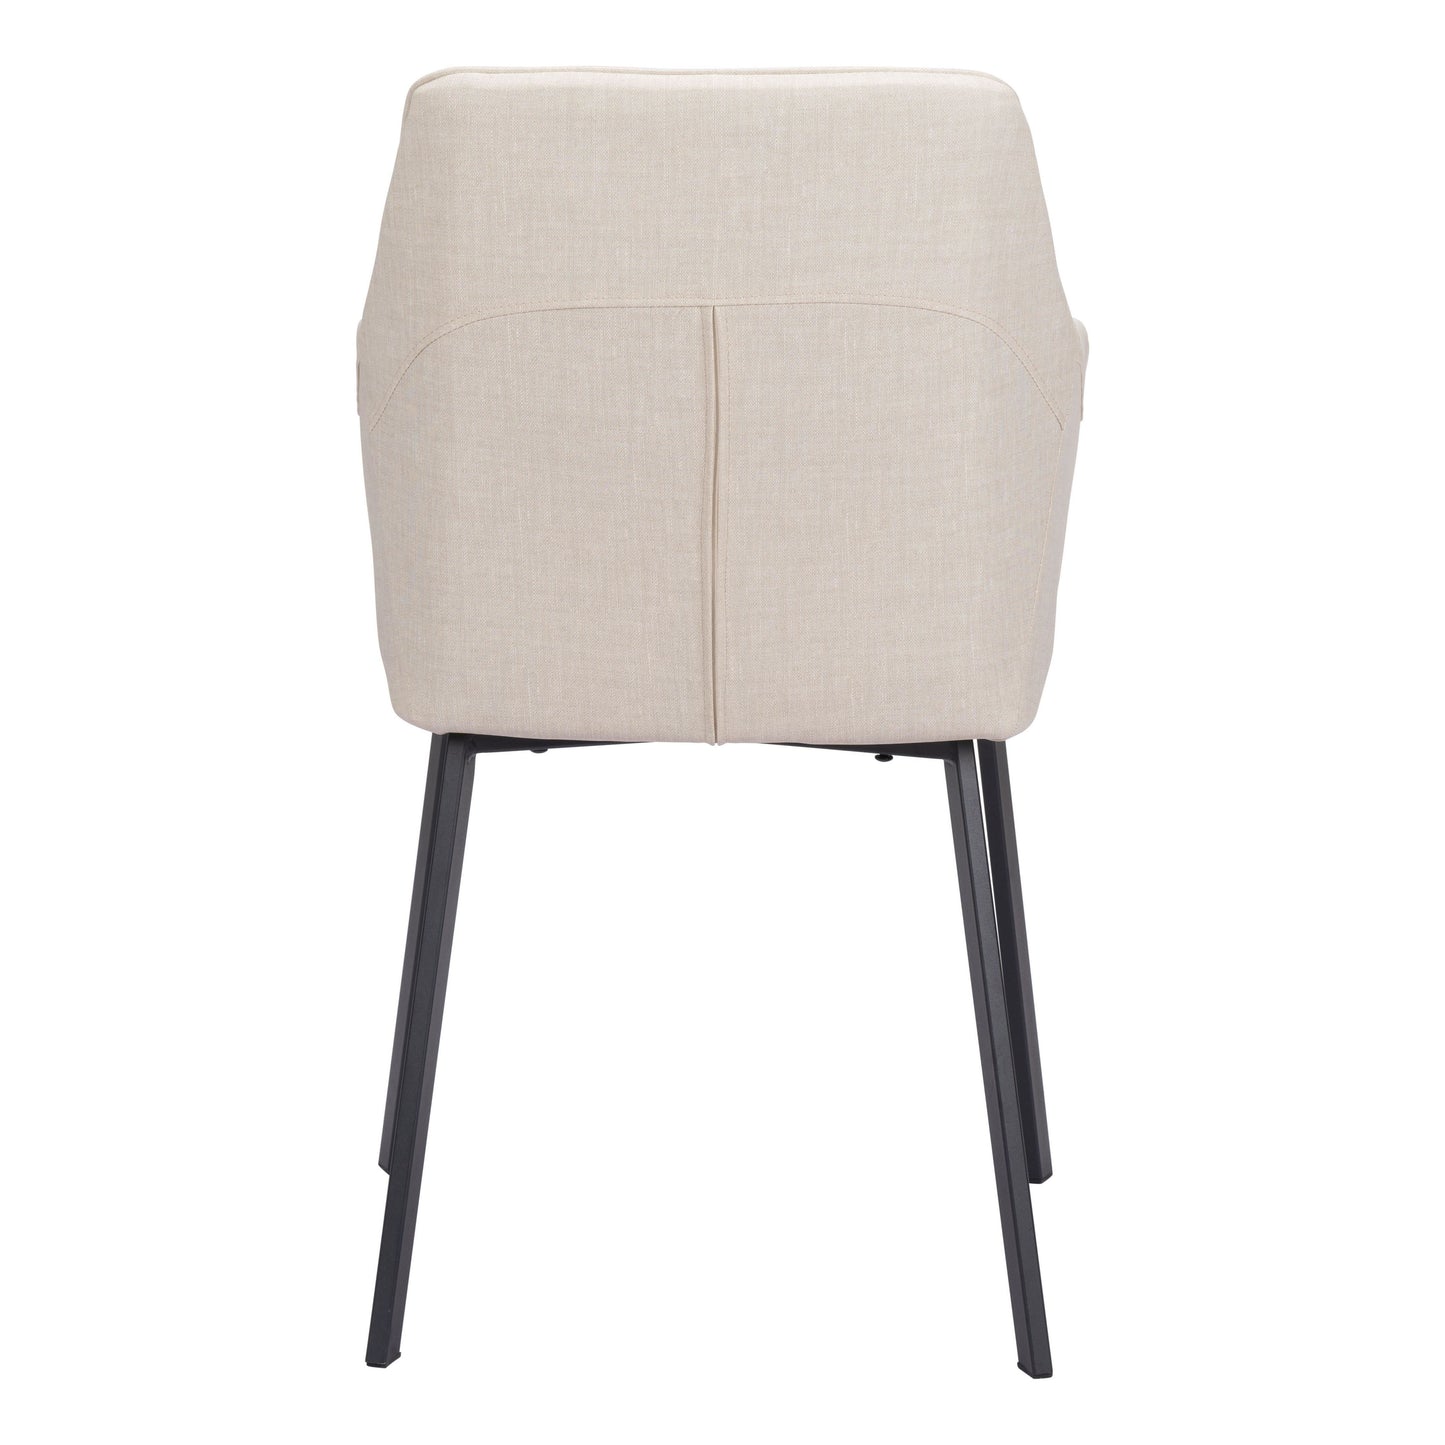 Adage Dining Chair (Set of 2) Beige